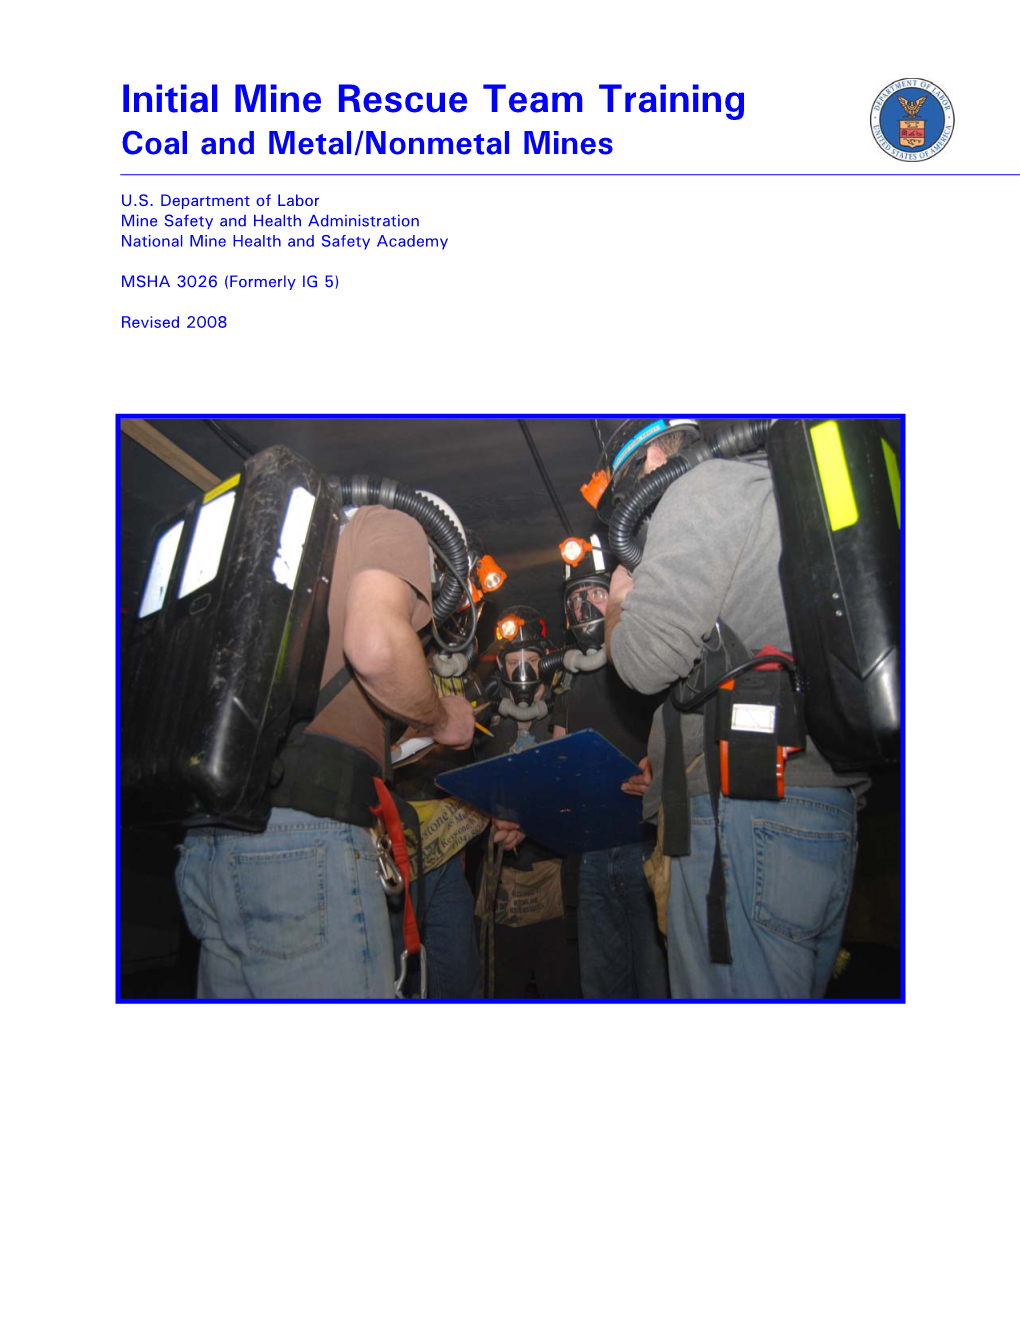 Mine Rescue Instruction Guide (IG) Series Is Intended to Help Mine Operators Develop Mine Rescue Team Training Required Under 30 CFR Part 49